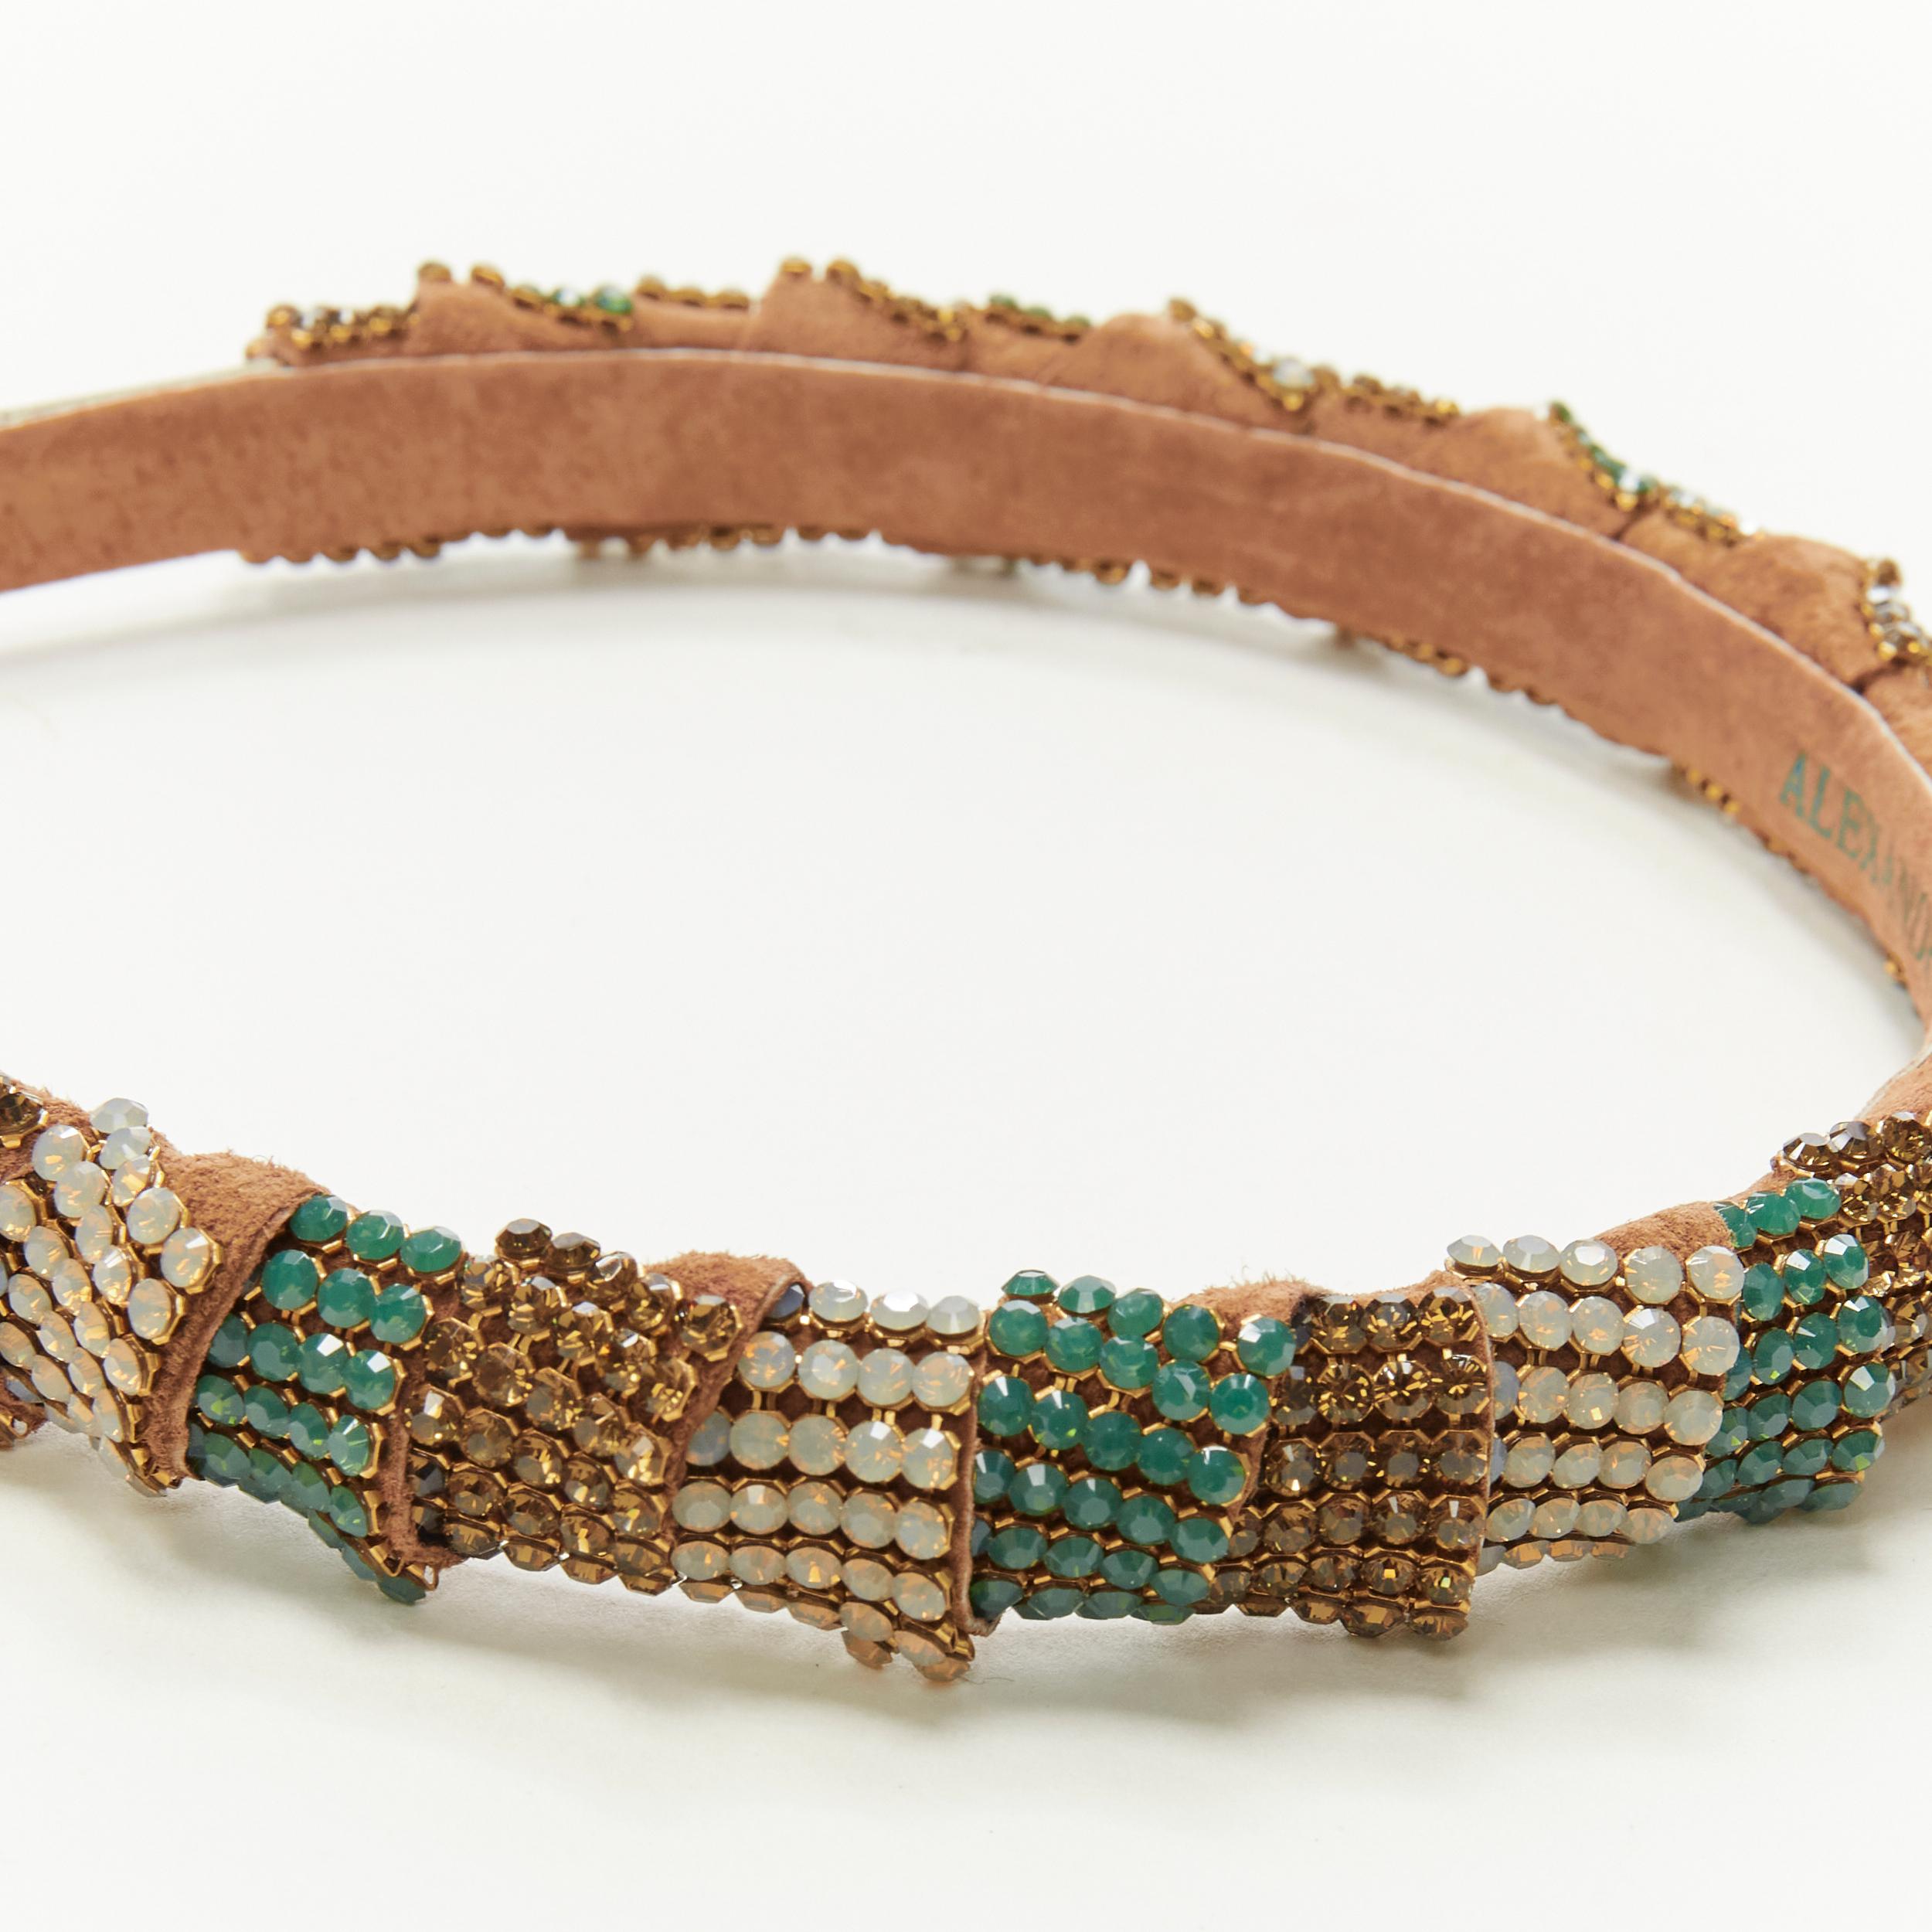 ALEXANDER ZOUARI bronze leather copper white green crystal encrusted headband 
Reference: ANWU/A00206 
Brand: Alexandre Zouari 
Designer: Alexandre Zouari 
Material: Suede 
Color: Brown 
Pattern: Solid 
Made in: France 

CONDITION: 
Condition: